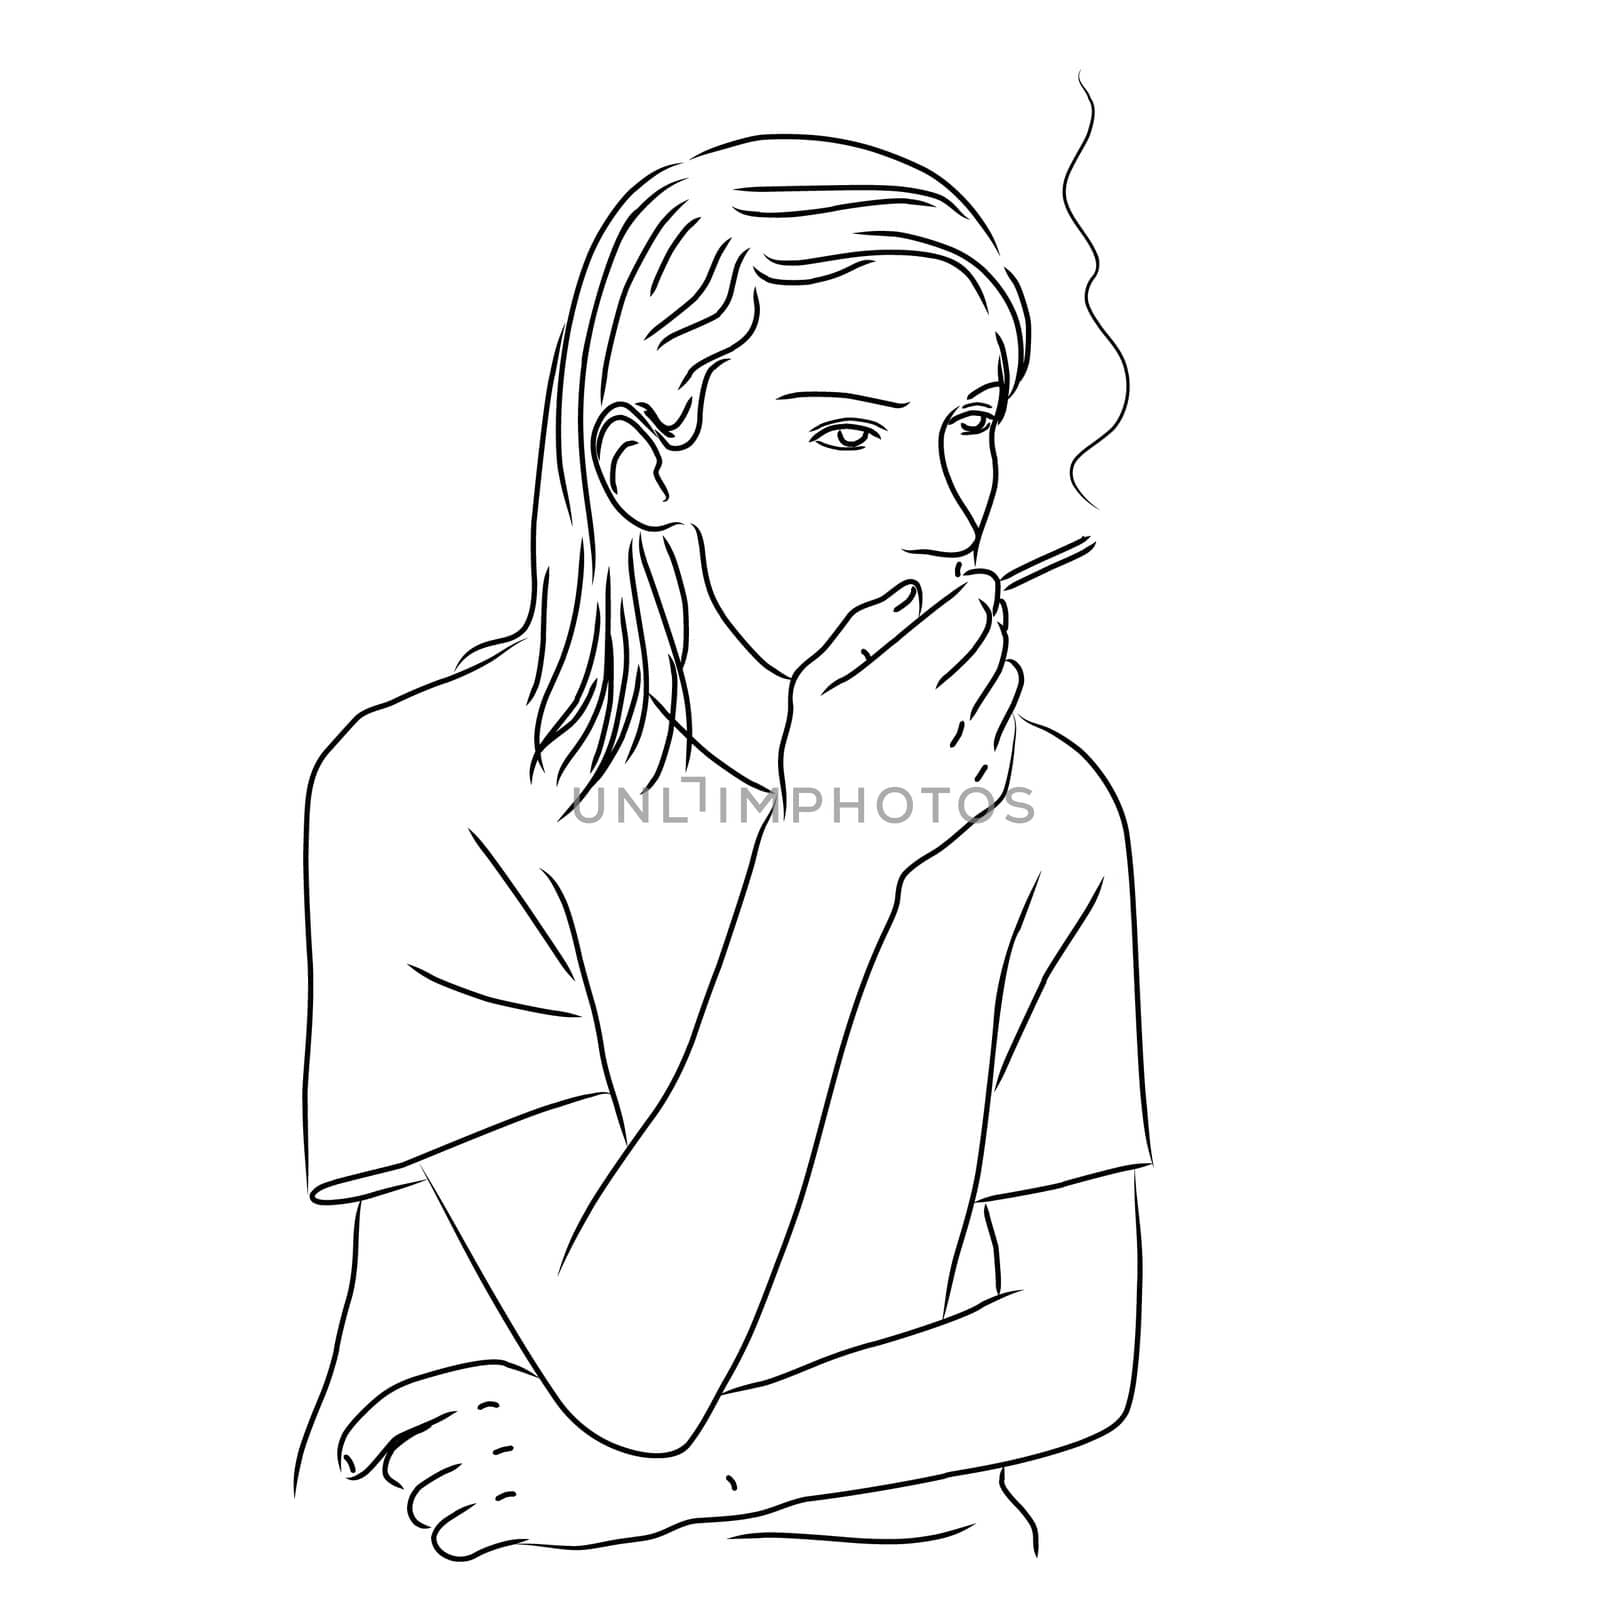 Drawing a young man with a cigarette, black lines